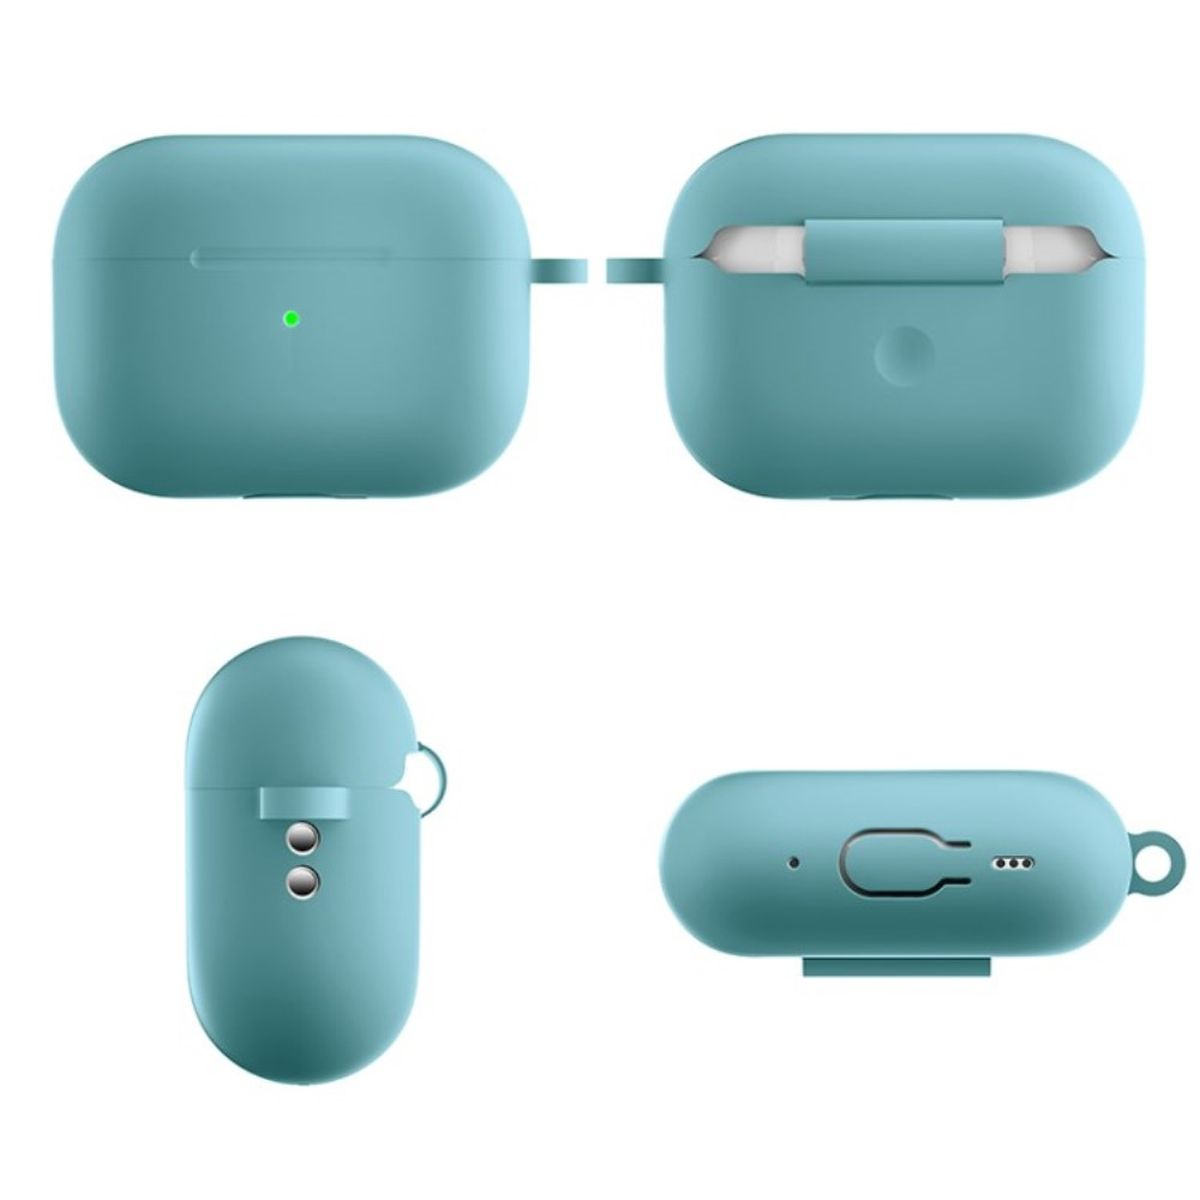 COVERKINGZ Silikoncover Ladecase für Apple Airpods mint, 2 Pro Unisex, 77380